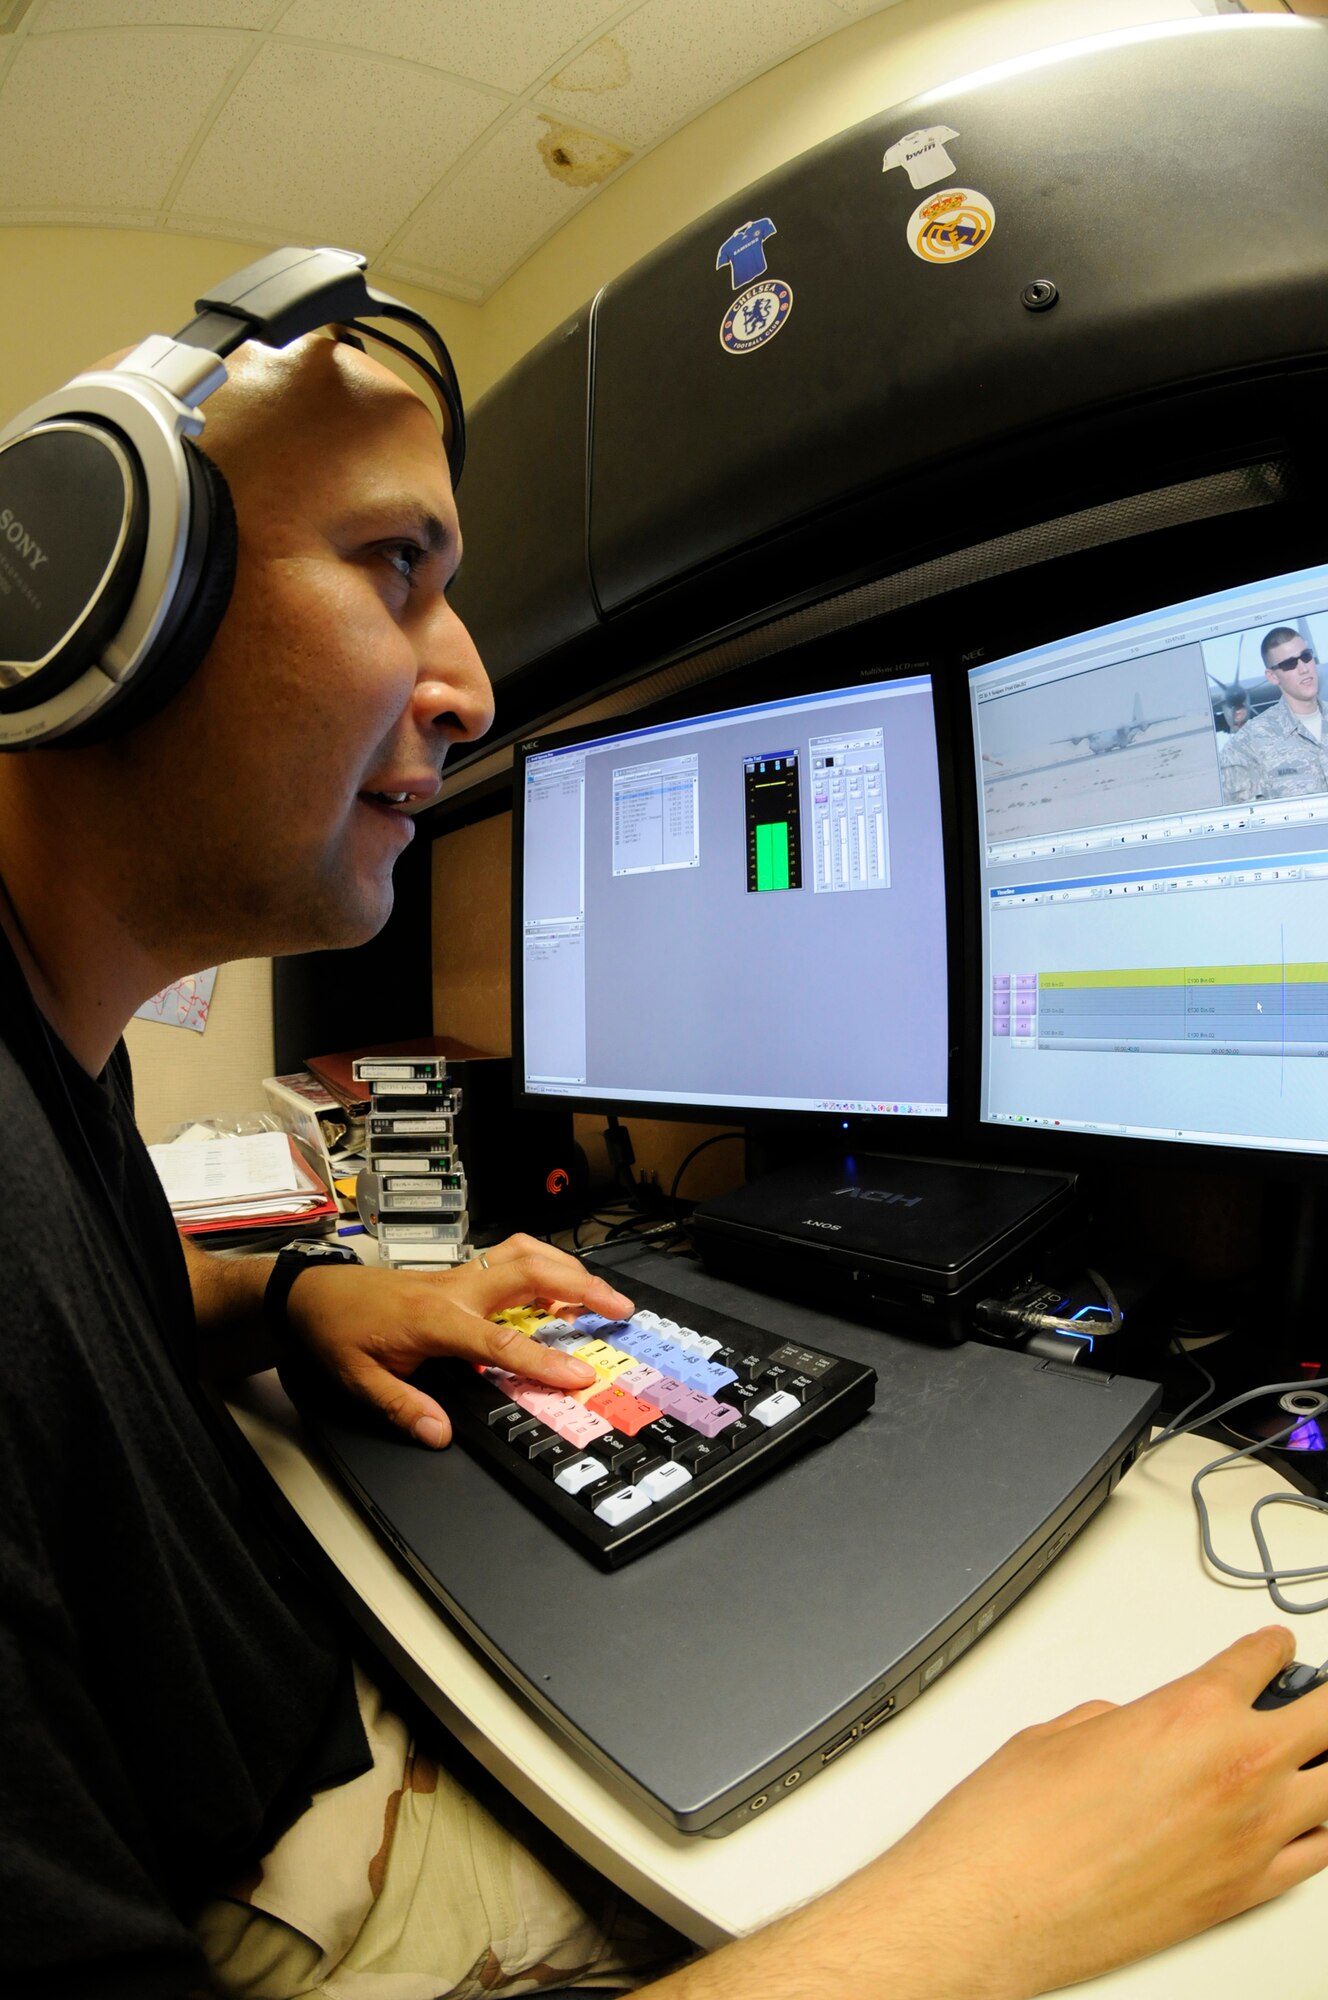 Staff Sgt. Pedro Jimenez, broadcaster assigned to the 379th Air Expeditionary Wing, edits a broadcast story Oct. 2, 2008, at an undisclosed air base in Southwest Asia. Broadcasters document Global War on Terror efforts and work to publicize the military's efforts to the American public. Sergeant Jimenez, a native of Guadalupe, Calif., is deployed from Andersen Air Force Base, Guam., in support of Operations Iraqi and Enduring Freedom and Joint Task Force-Horn of Africa. (U.S. Air Force photo by Staff Sgt. Darnell T. Cannady/Released)